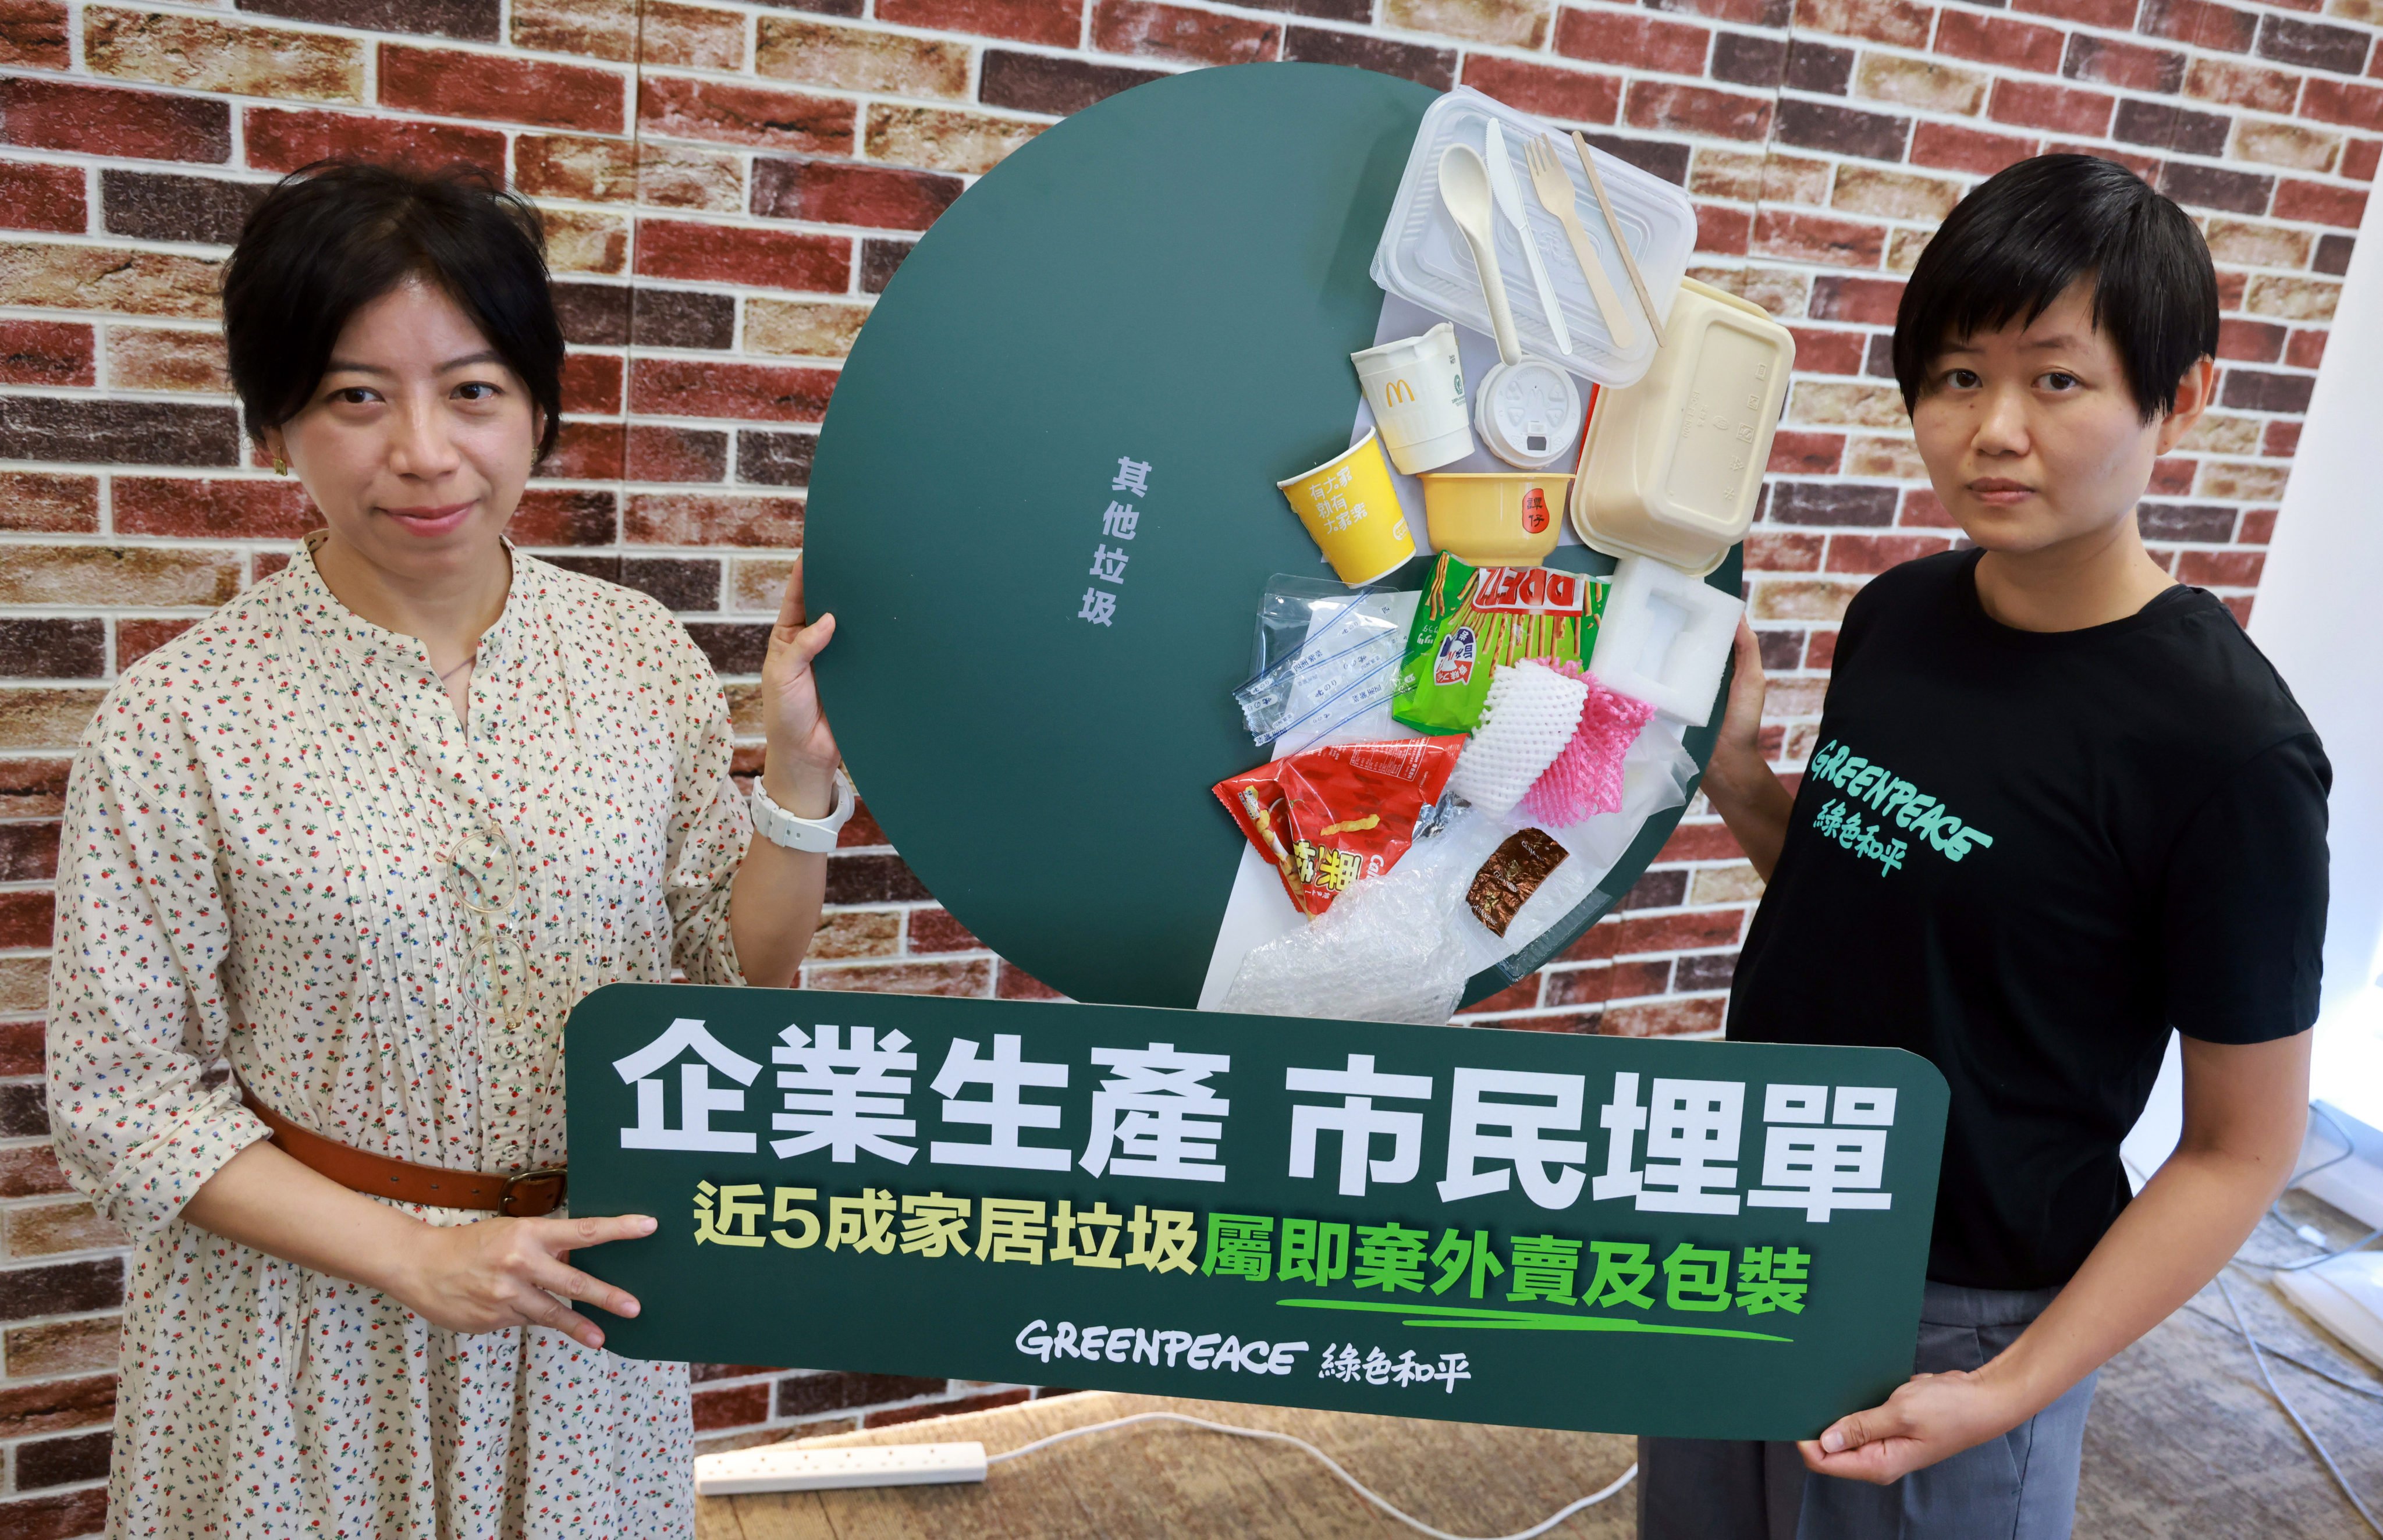 Leanne Tam (right), a Greenpeace campaigner, has said her group found that excess packaging produced by firms may cost households more ahead of the waste-charging scheme. Photo: May Tse